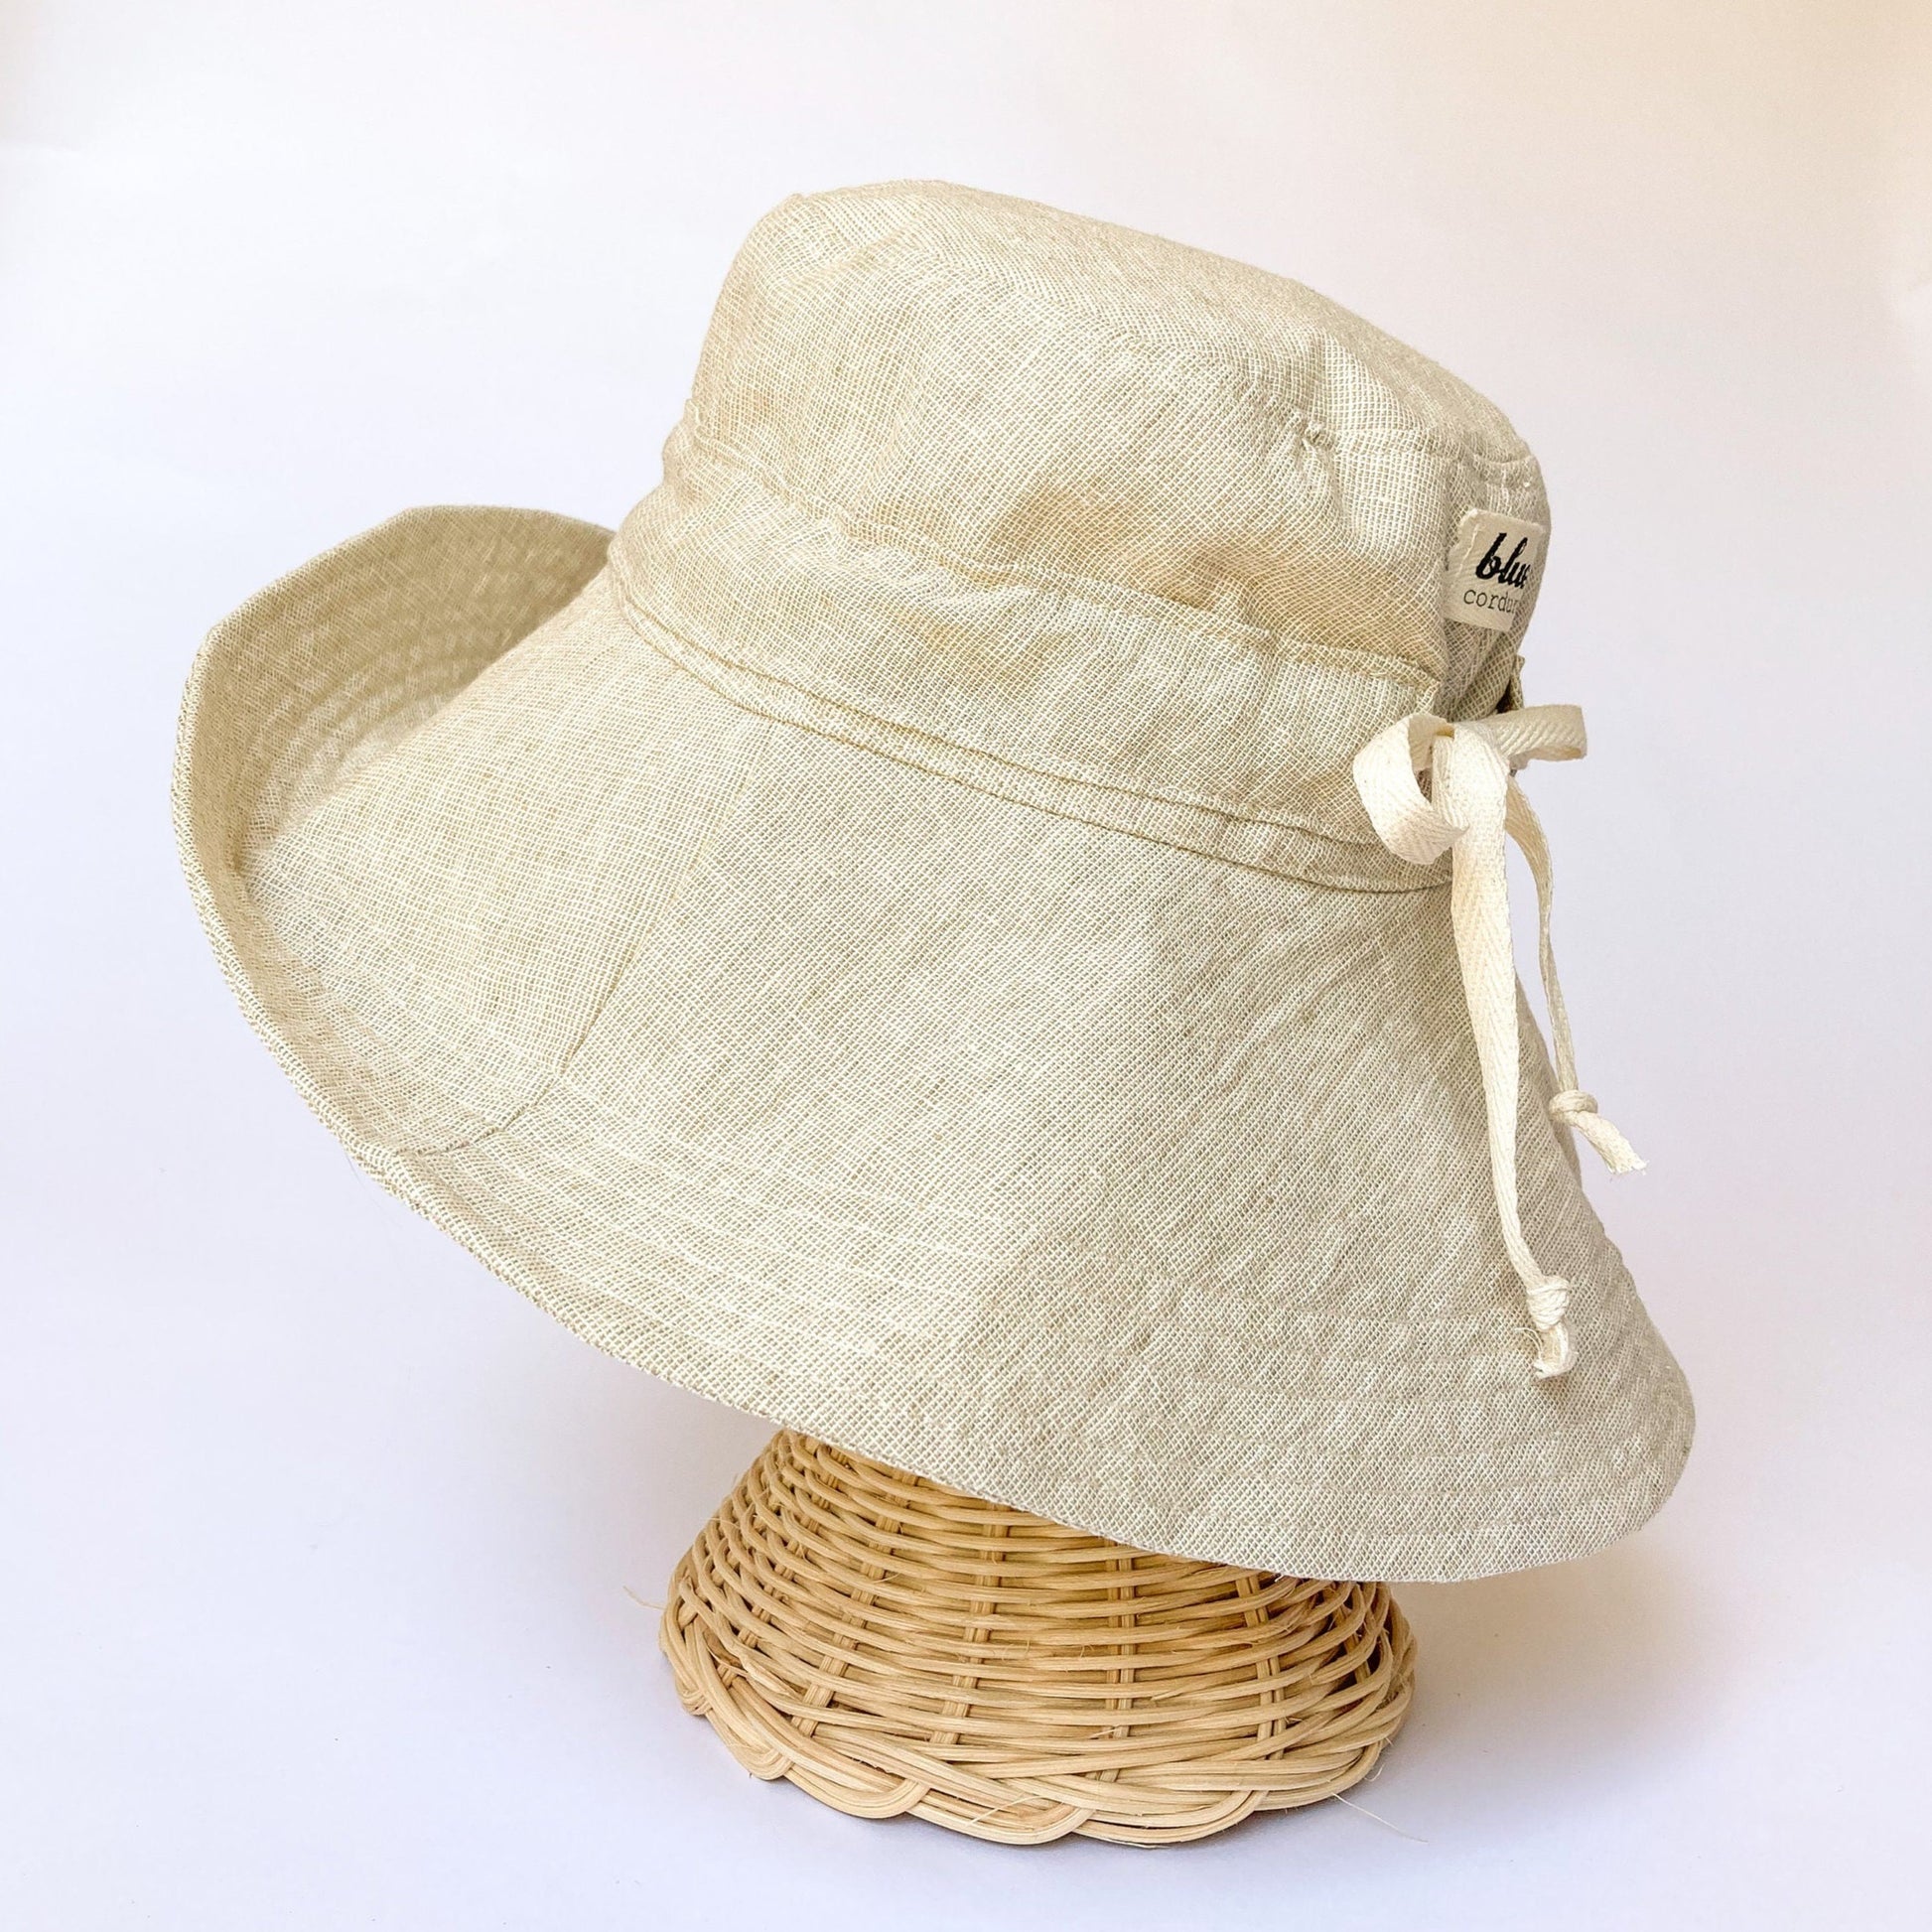 Wide Brim Sun Hat with Adjustable Tie, Linen Summer Hat for Women, Foldable Hat for Vacation, Beach Gift for Her, Beige Fabric Hat